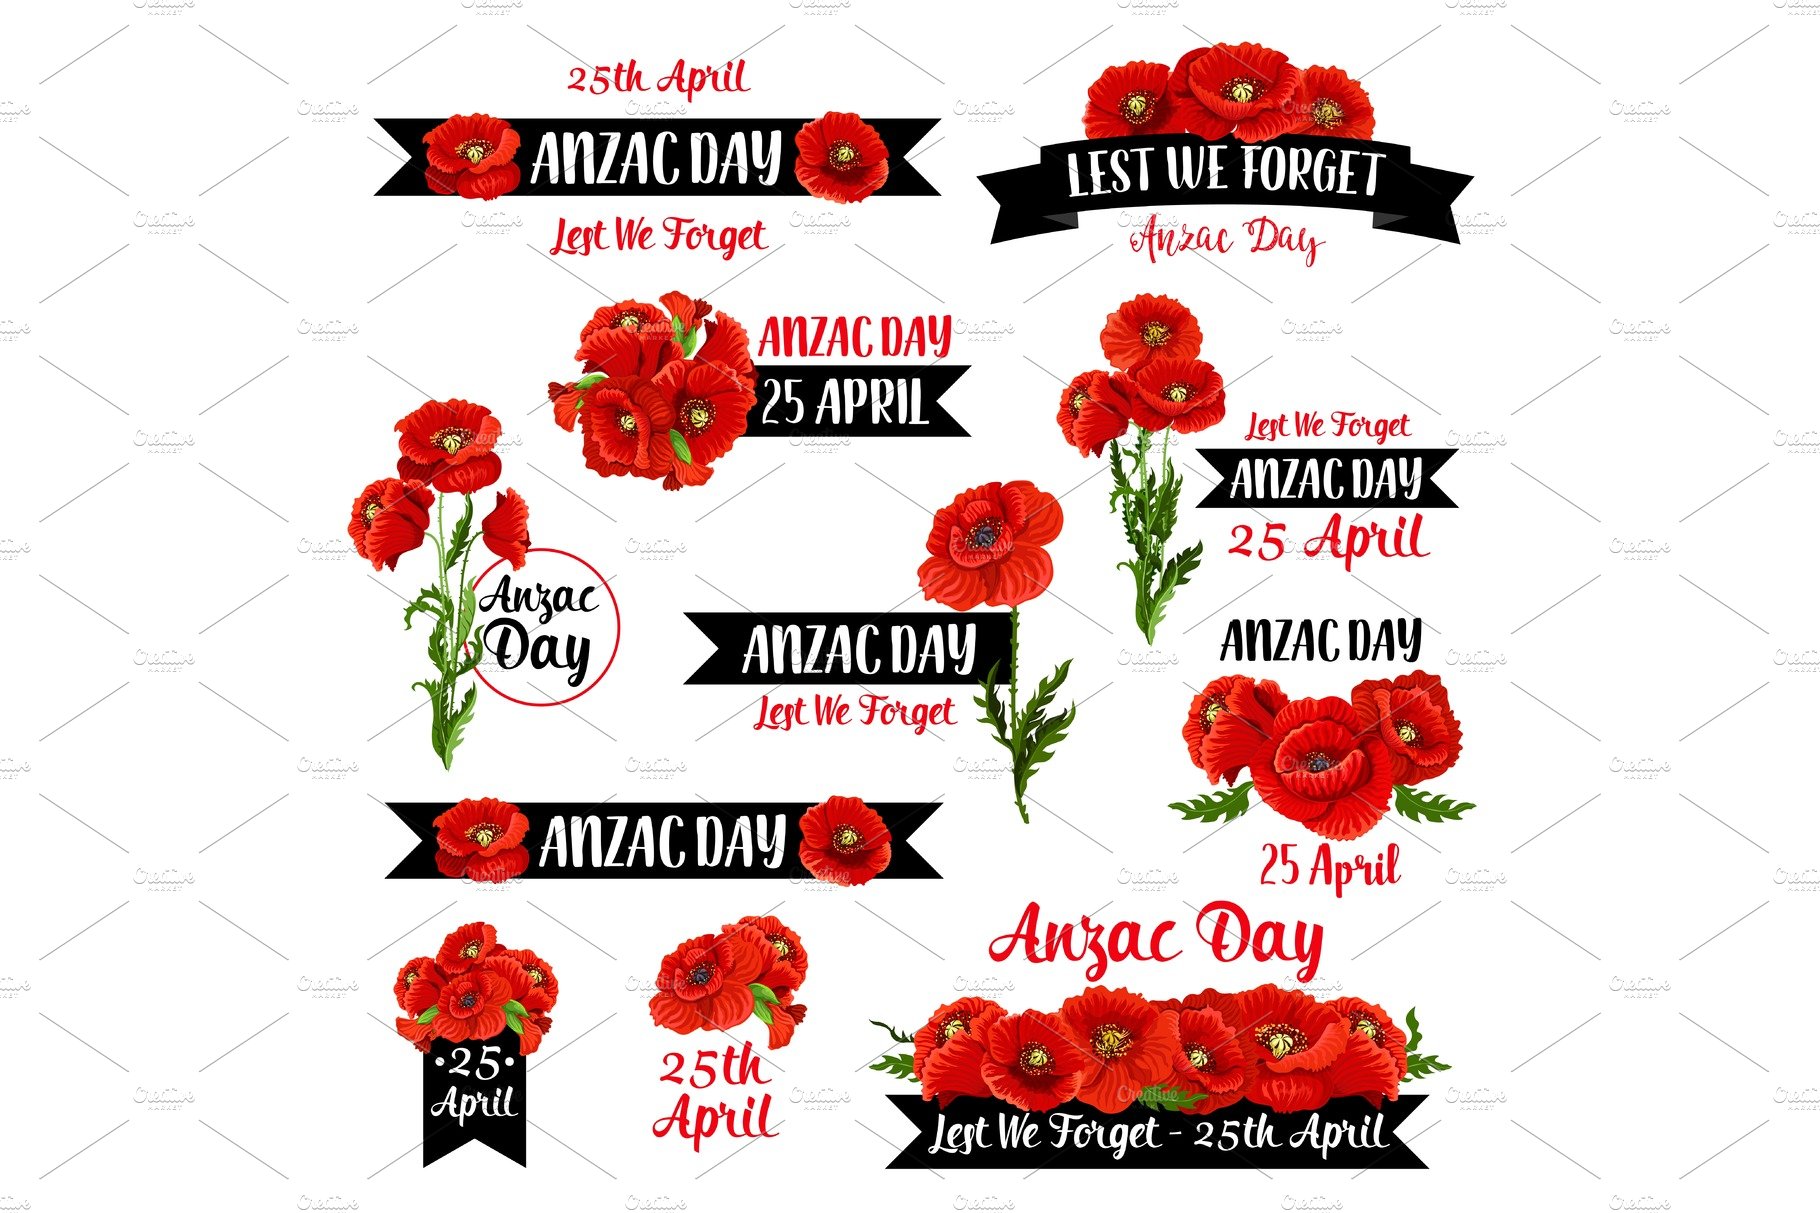 Anzac Remembrance Day badge of red poppy flower cover image.